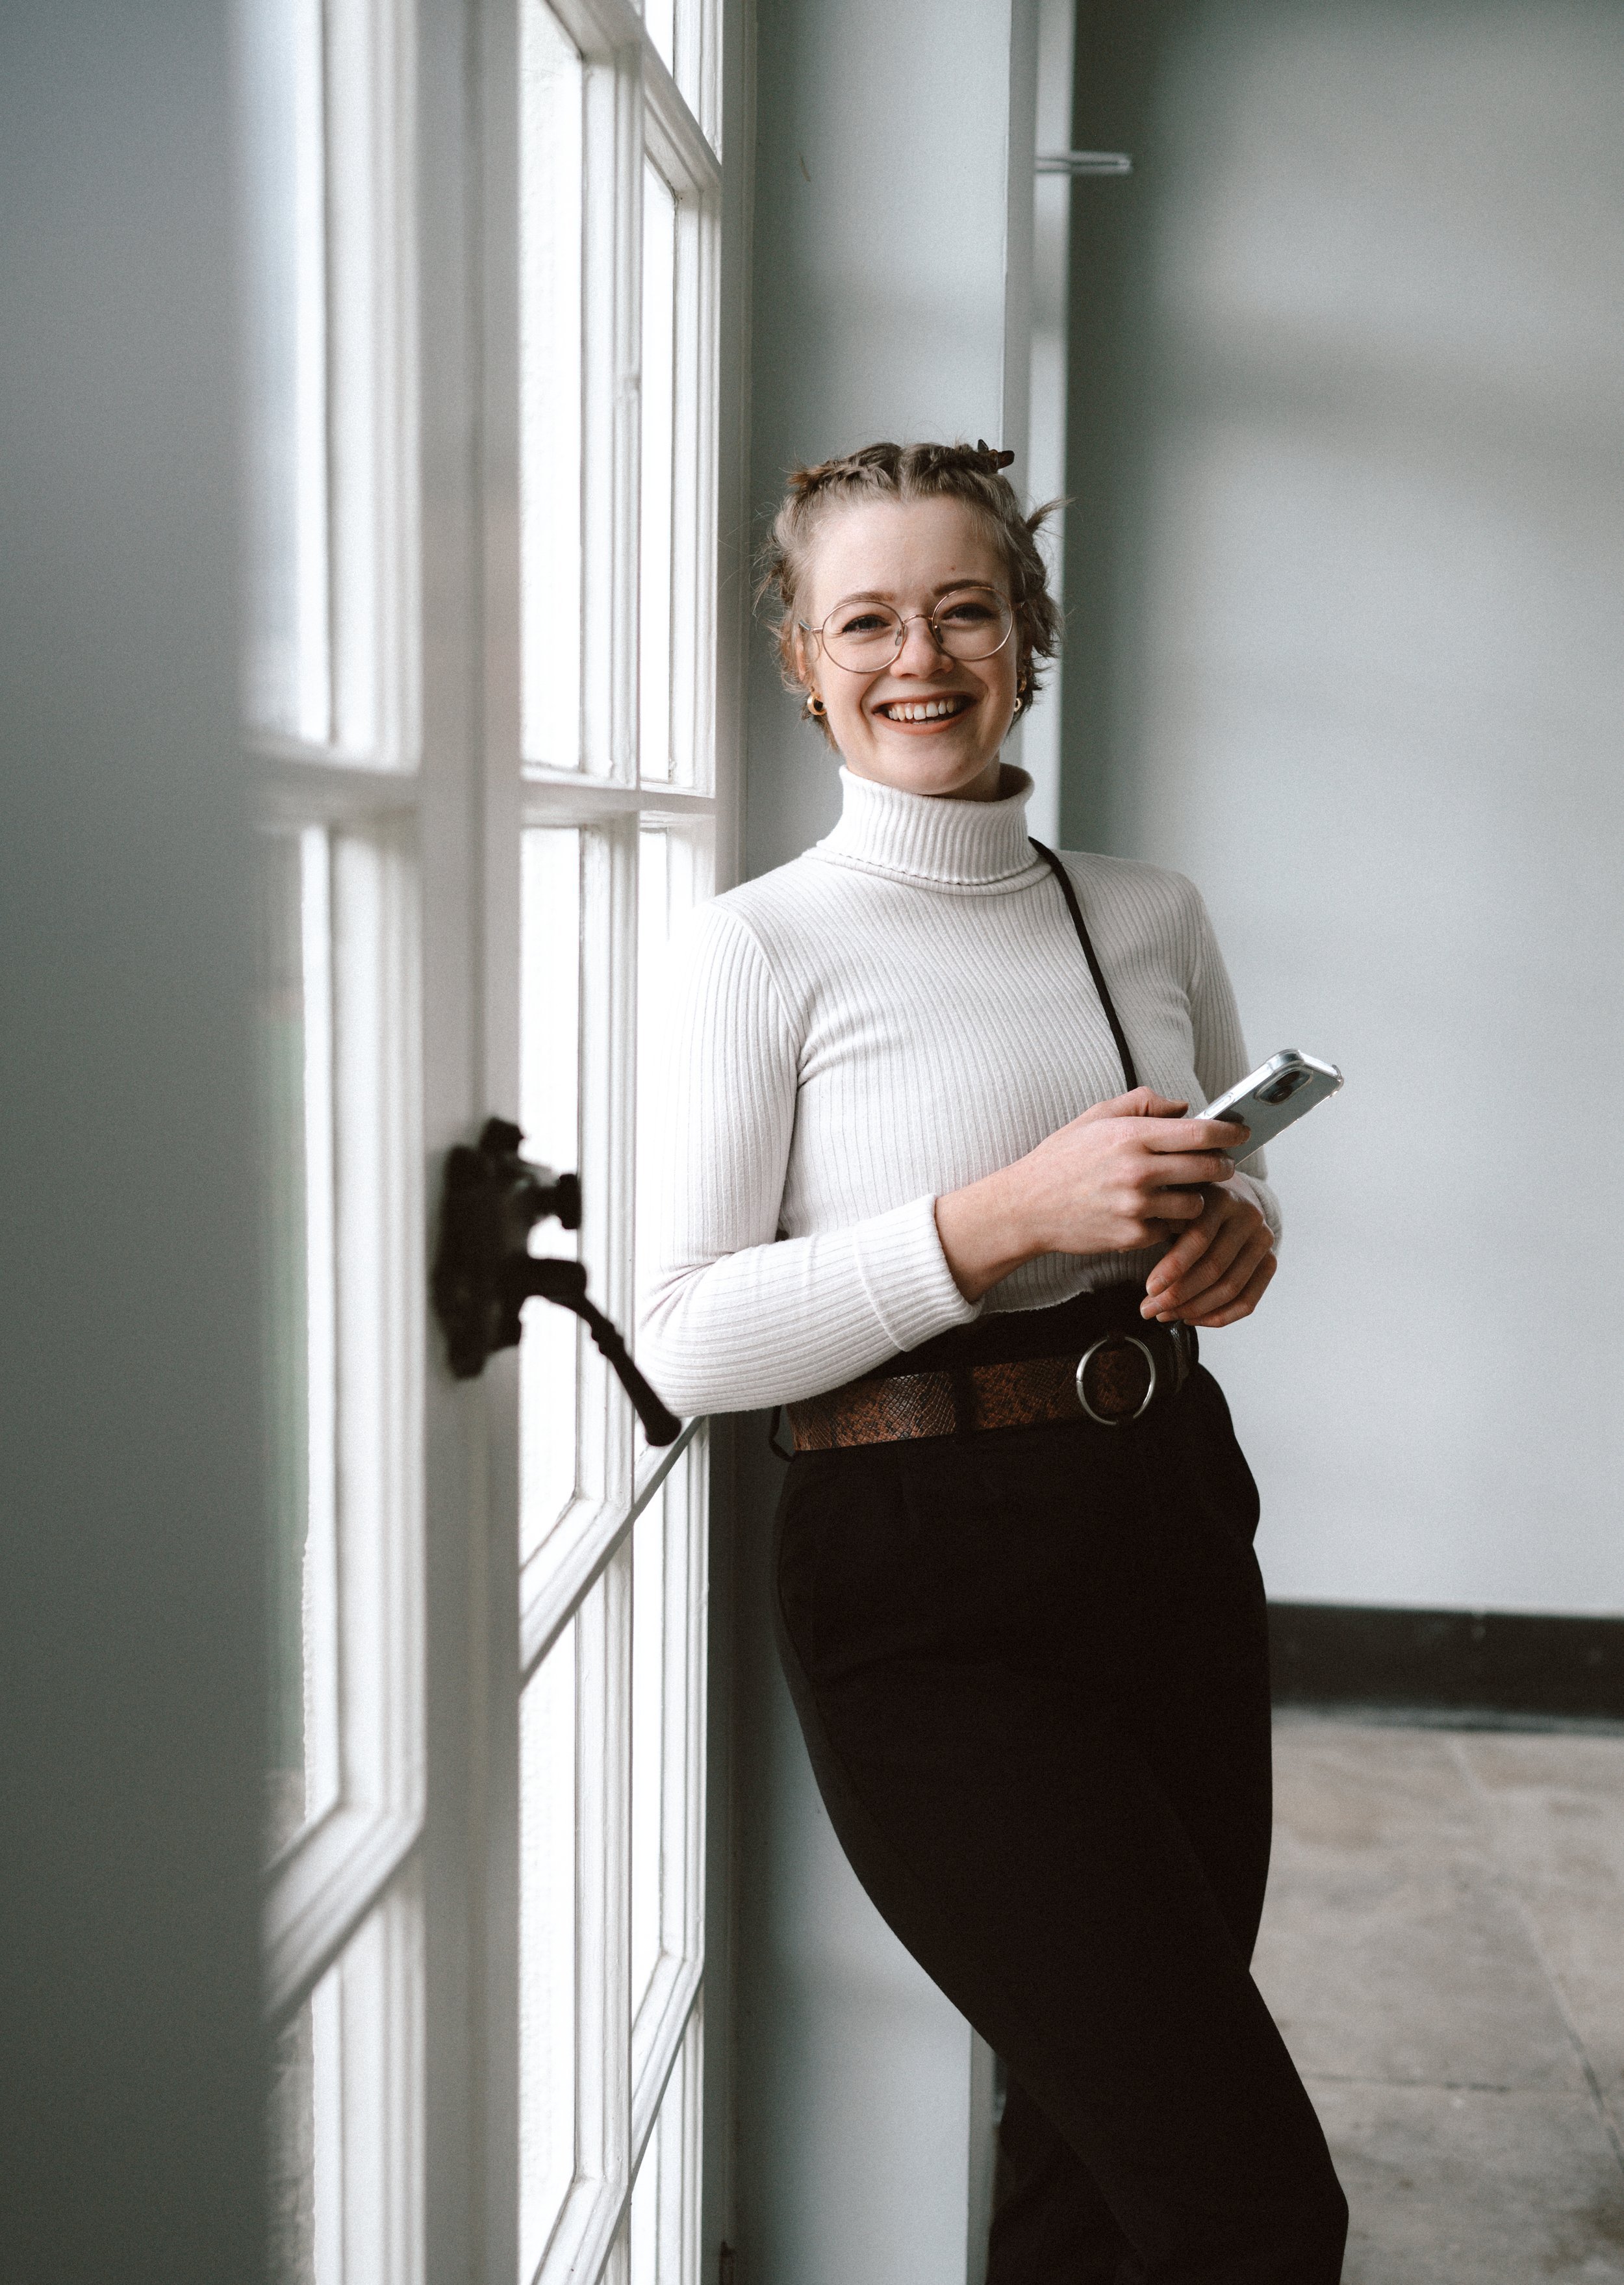 Photo of Allanah Veitch, a wedding content creator. She is a white woman in her twenties wearing a white jumper and black trousers. She is standing, leaning against a white door holding a smartphone